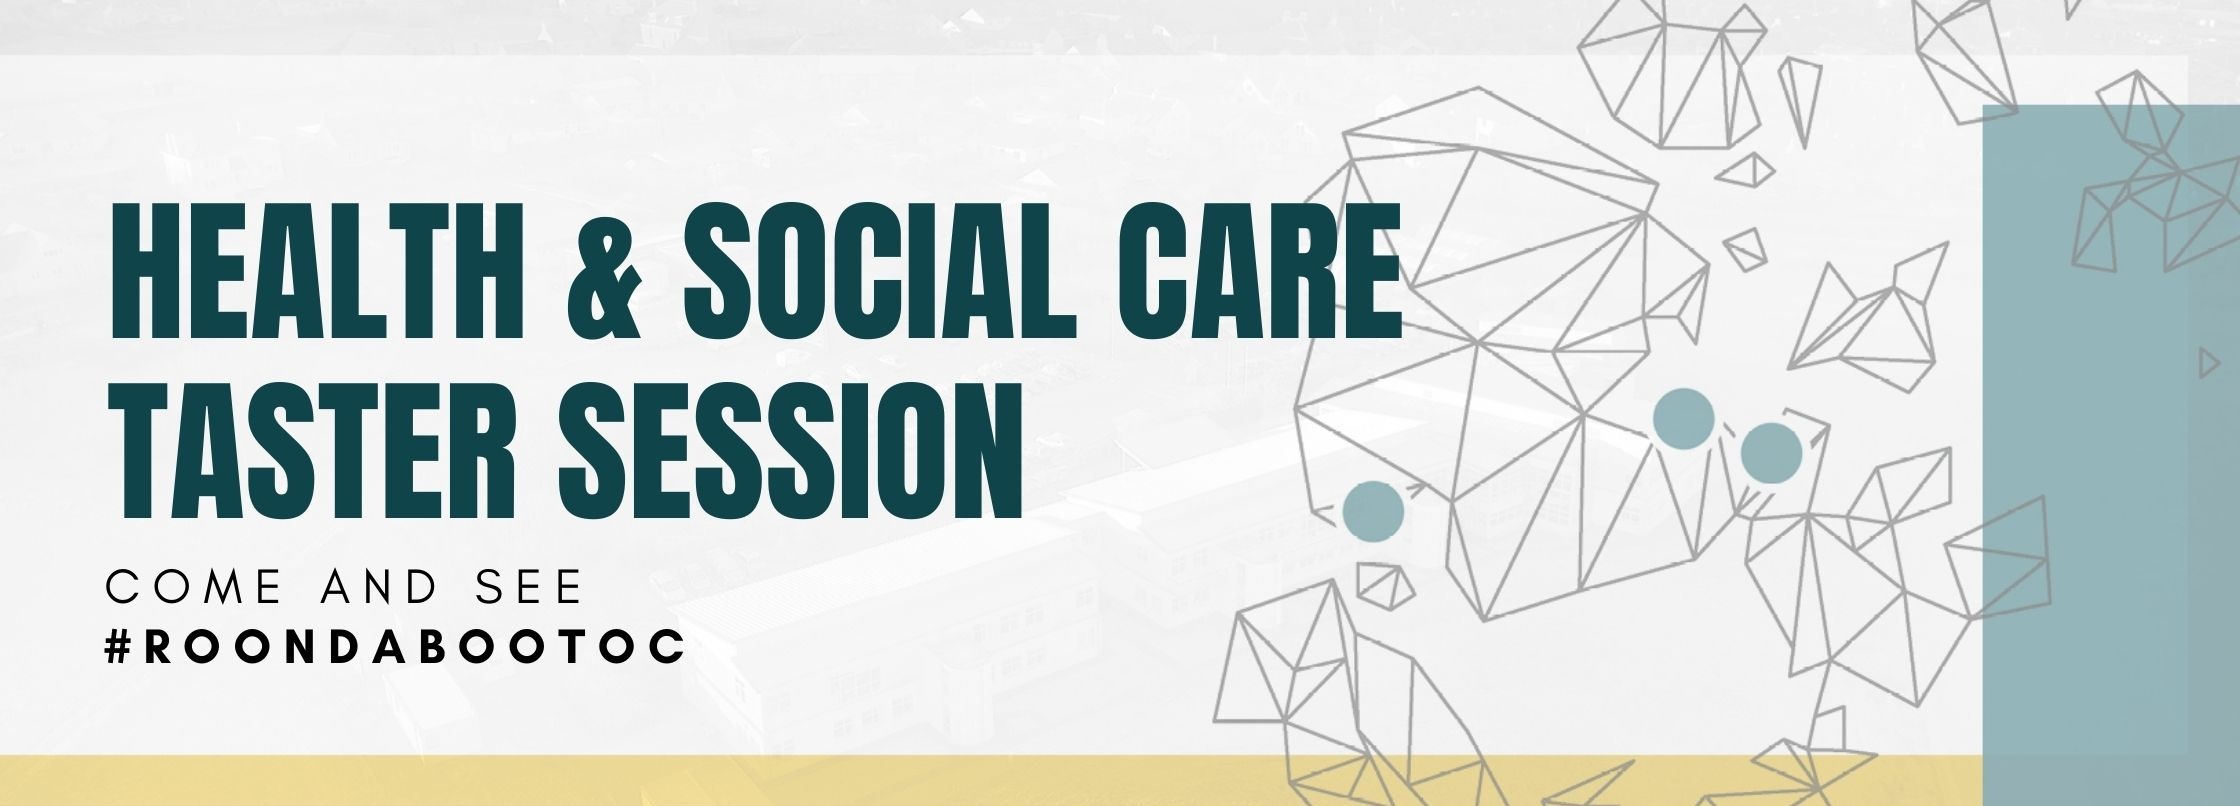 Health and social care taster session | Come and see | roondabootoc